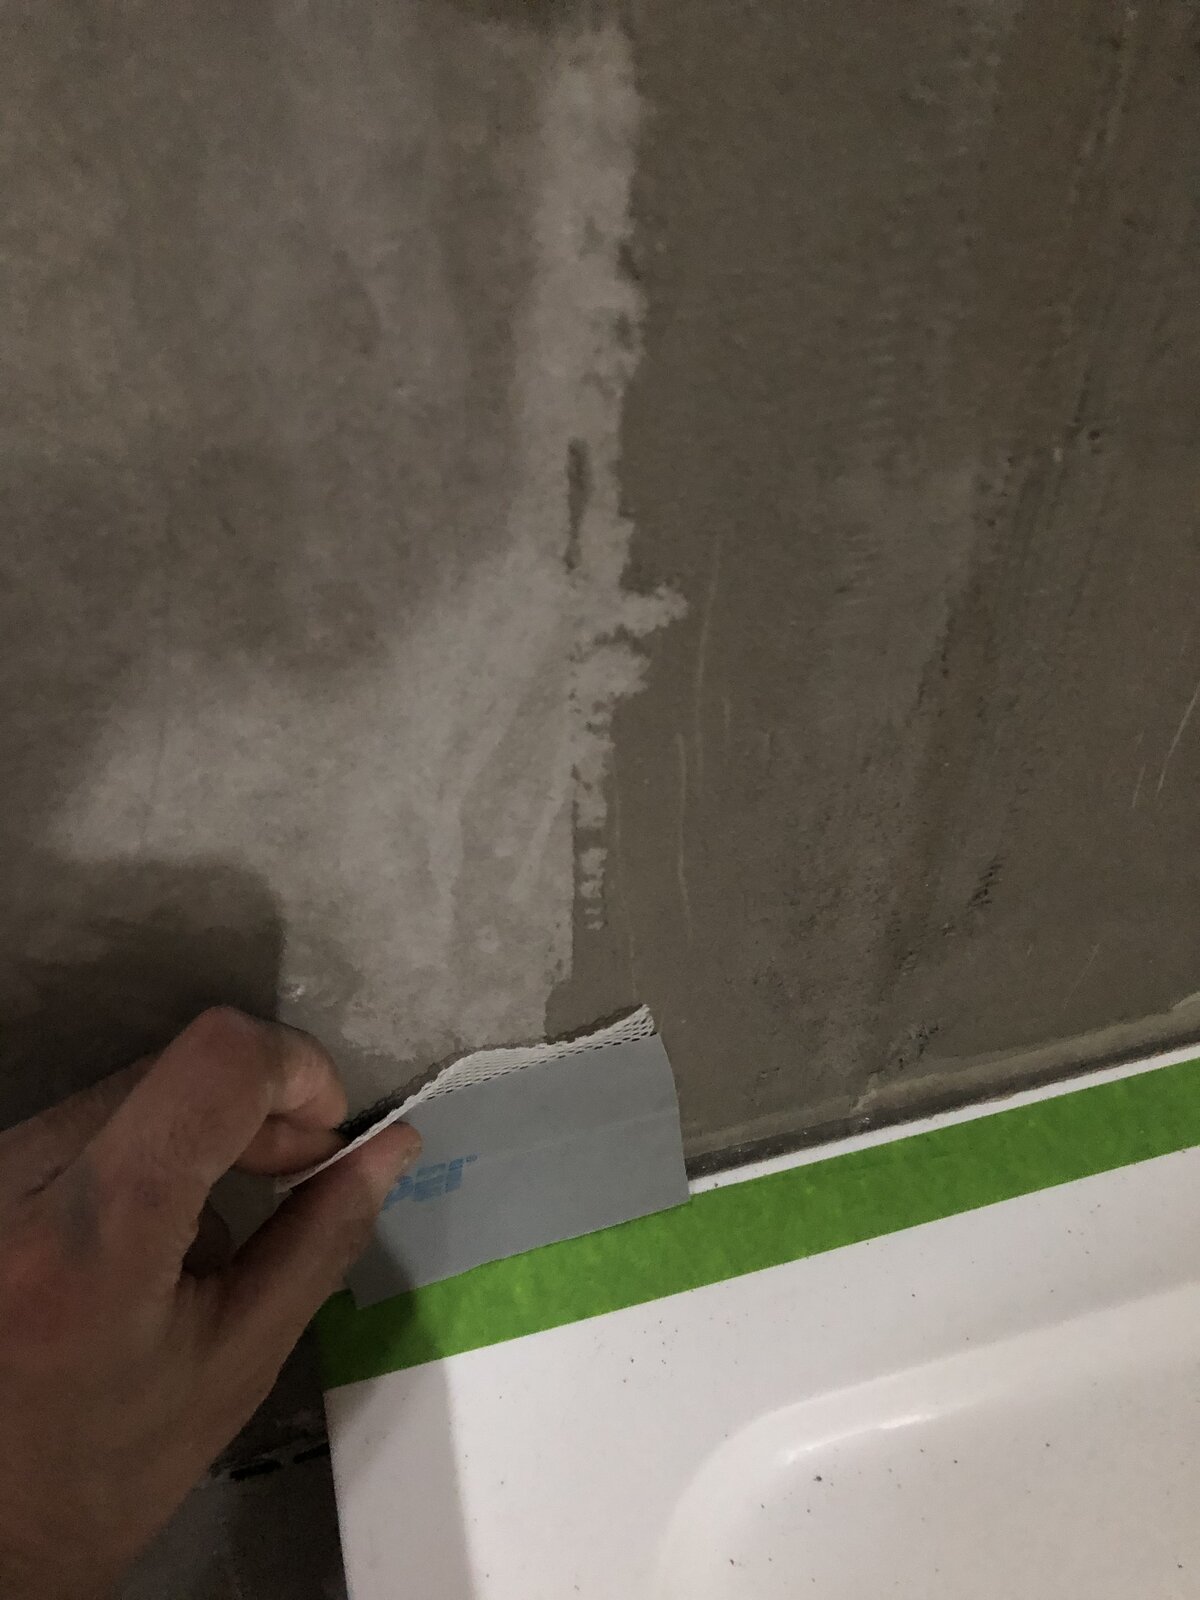 Cement board shower tray joint - waterproofing | DIYnot Forums